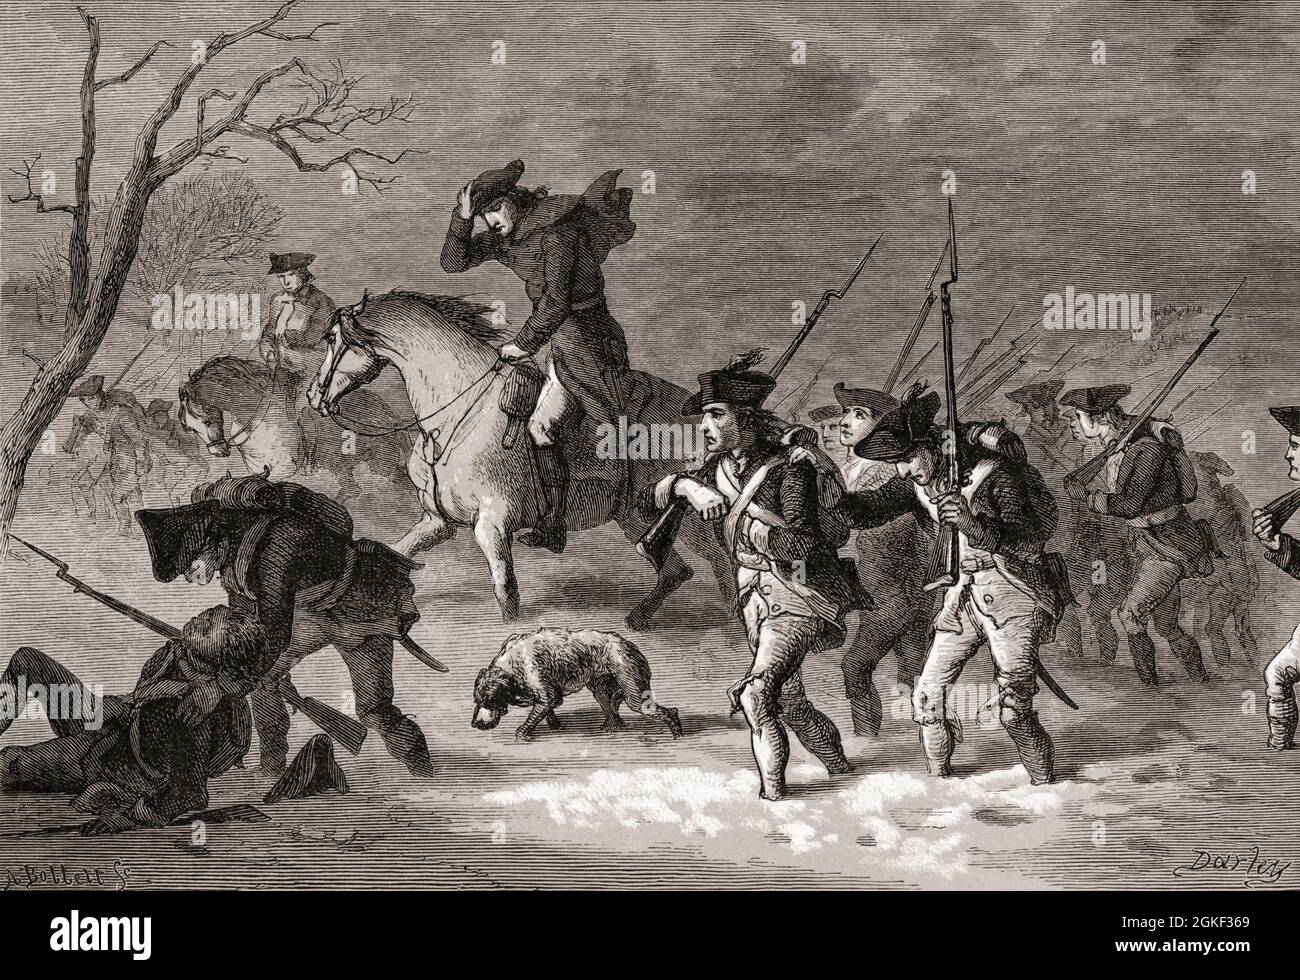 The March to Valley Forge.  After a 19th century work by Felix Darley, engraved by Albert Bobbett.  Valley Forge, in Pennsylvania, was a winter encampment of the Continental Army during the American Revolutionary War.  George Washington led 12,000 of his men to the camp after retreating from Philadelphia.  It is estimated that as many as 2,000 of his troops may have died from disease and malnutrition at Valley Forge Stock Photo